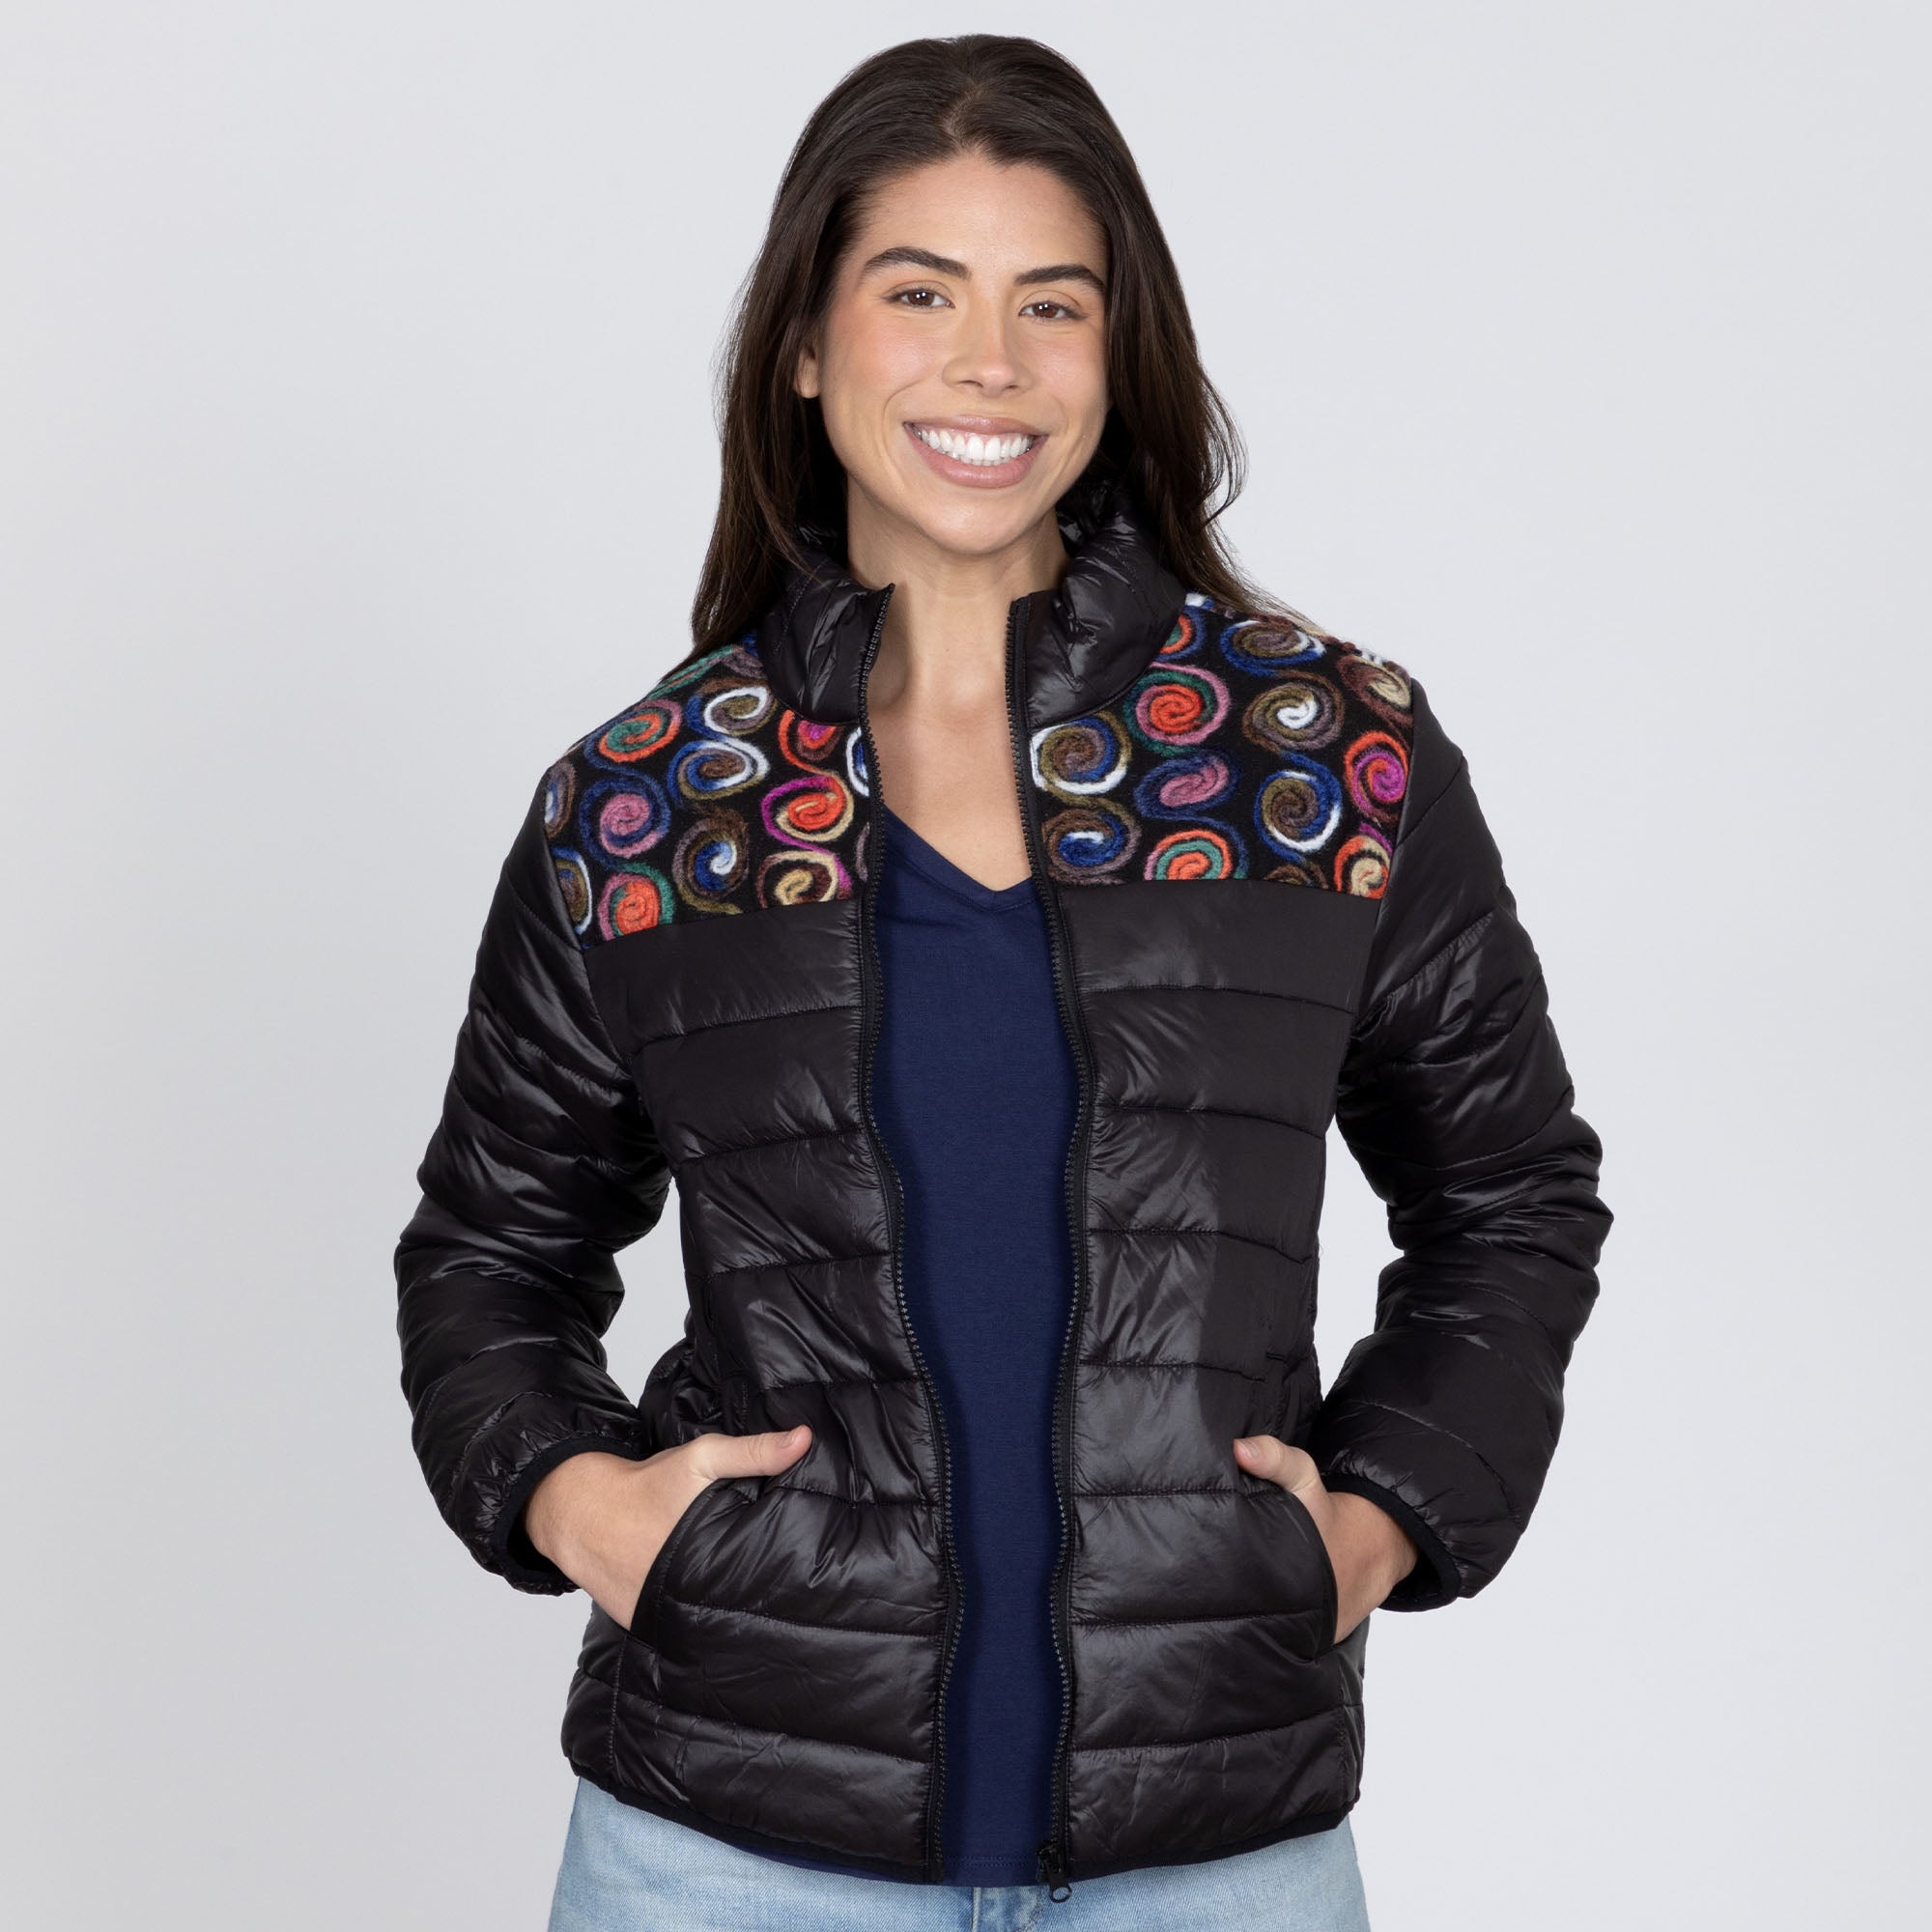 Mixed Fabric Embroidery Insulated Jacket - S